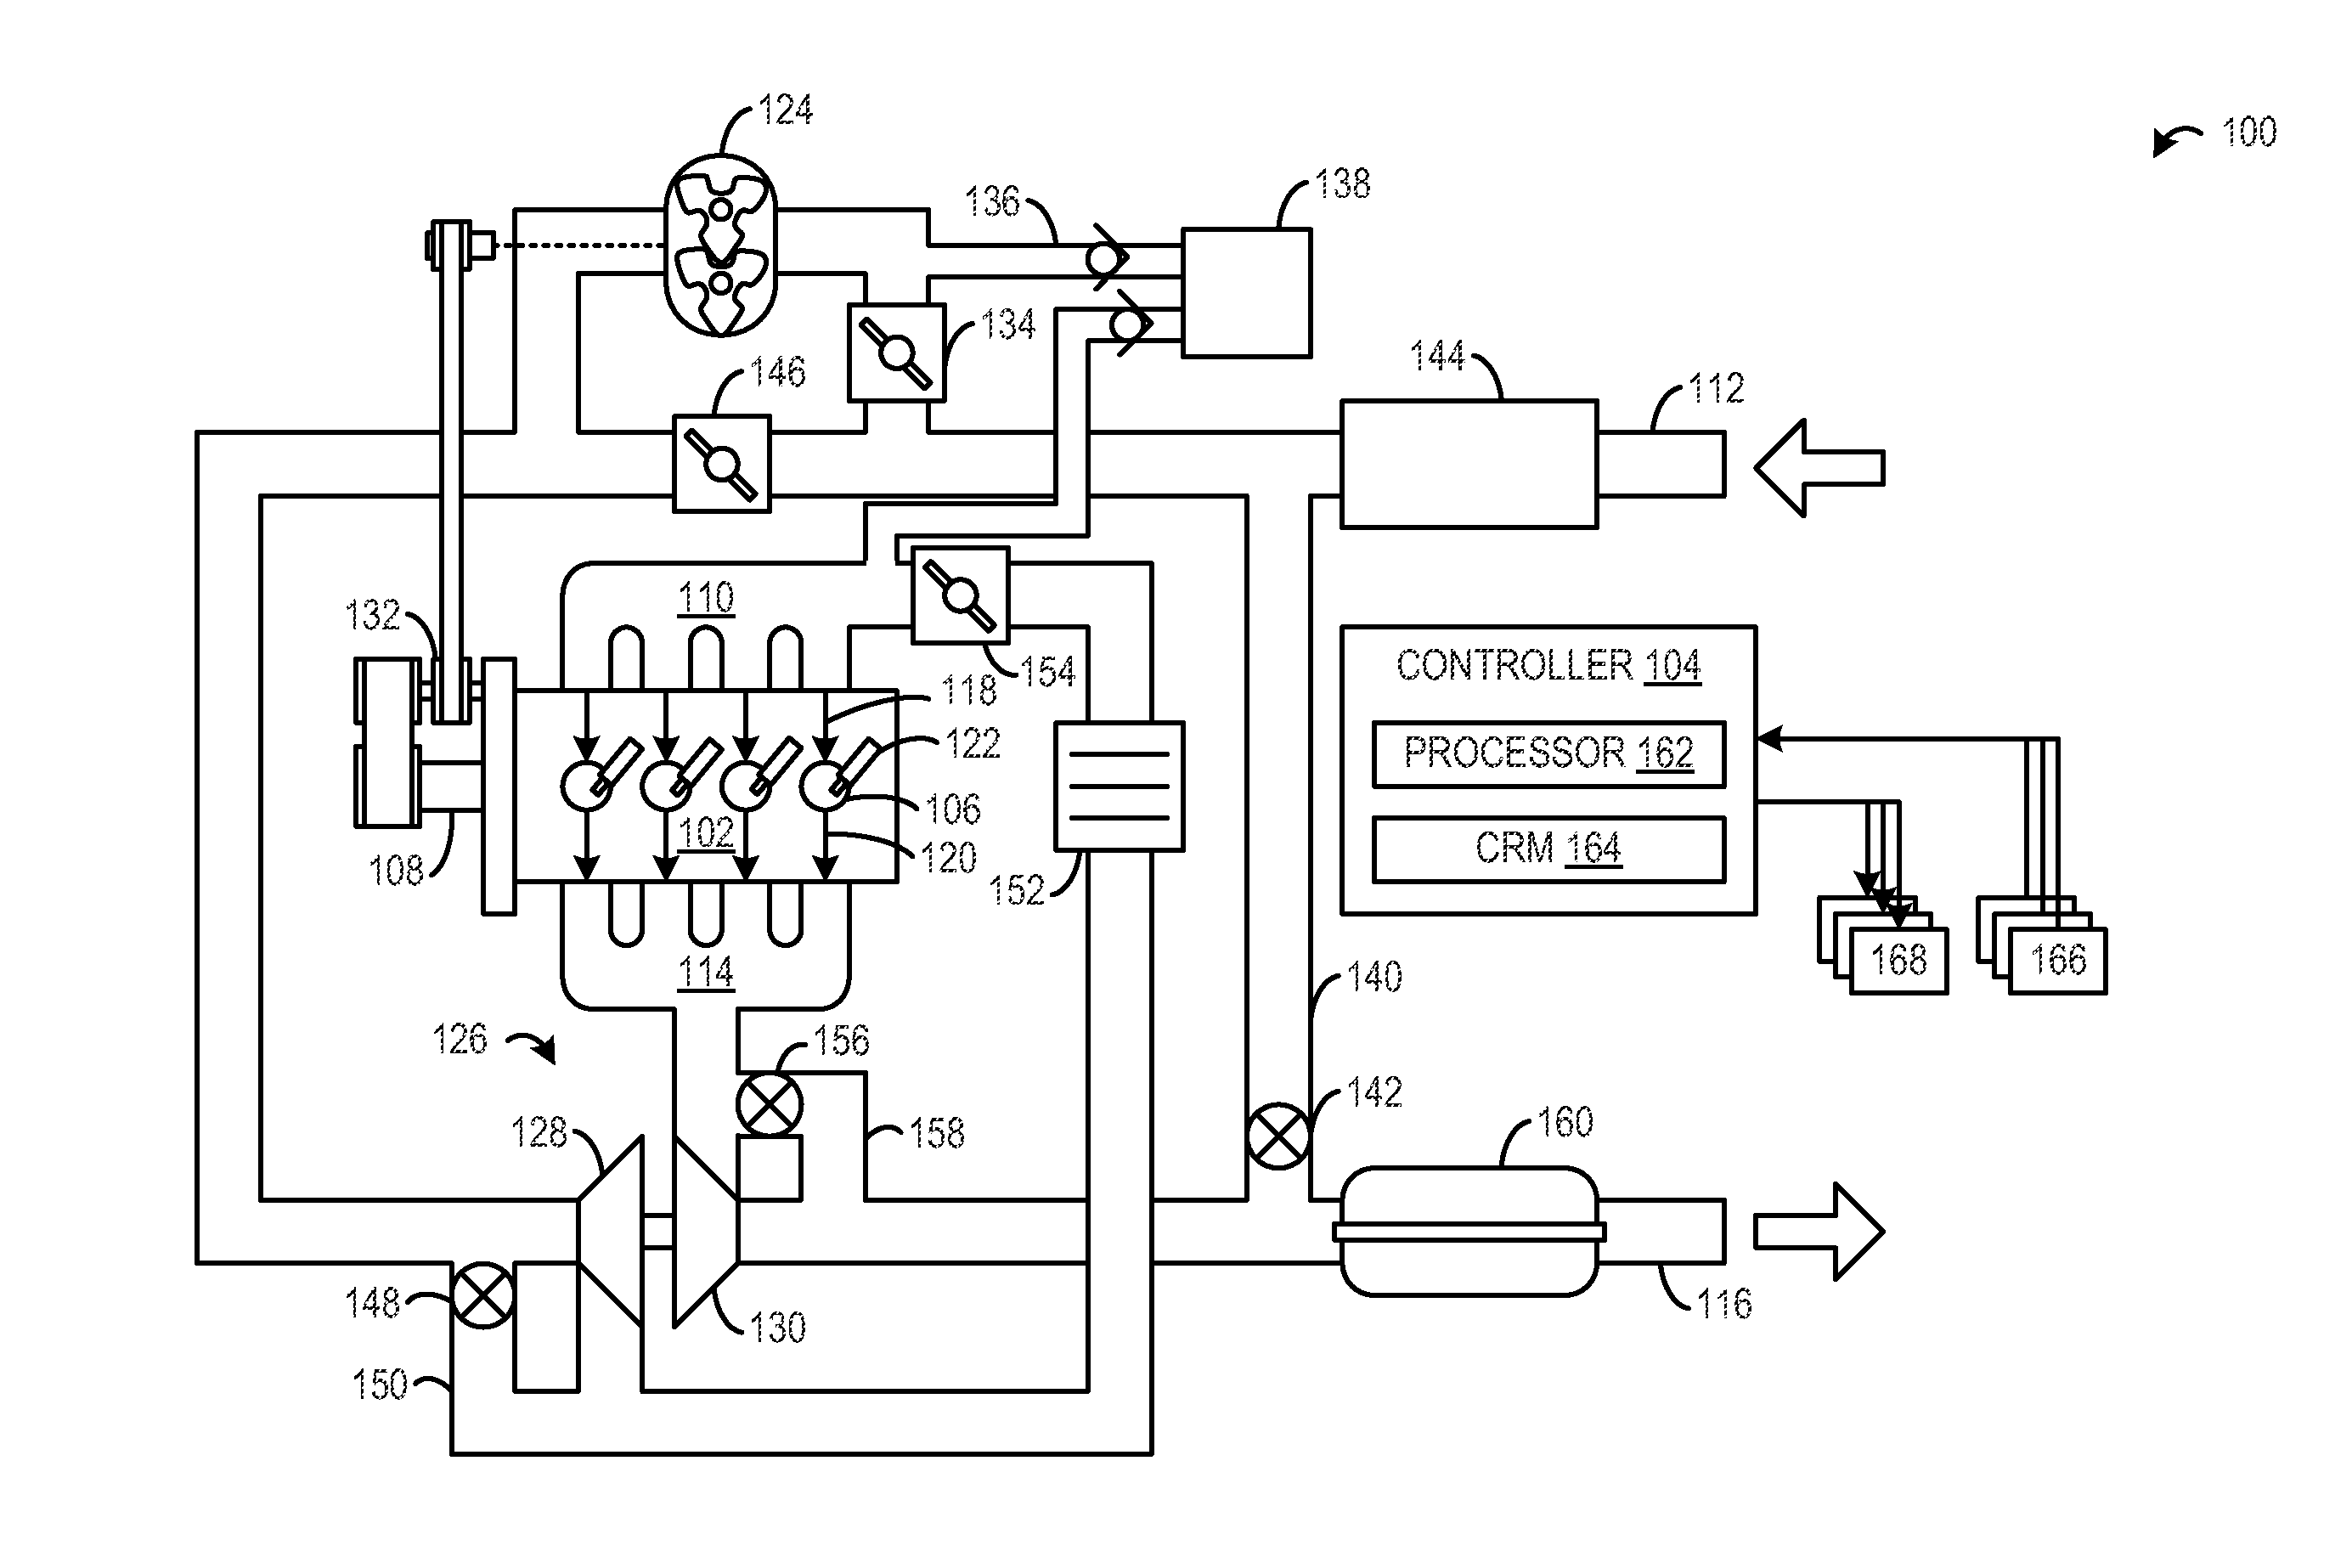 Approach for supplying vacuum via a supercharger